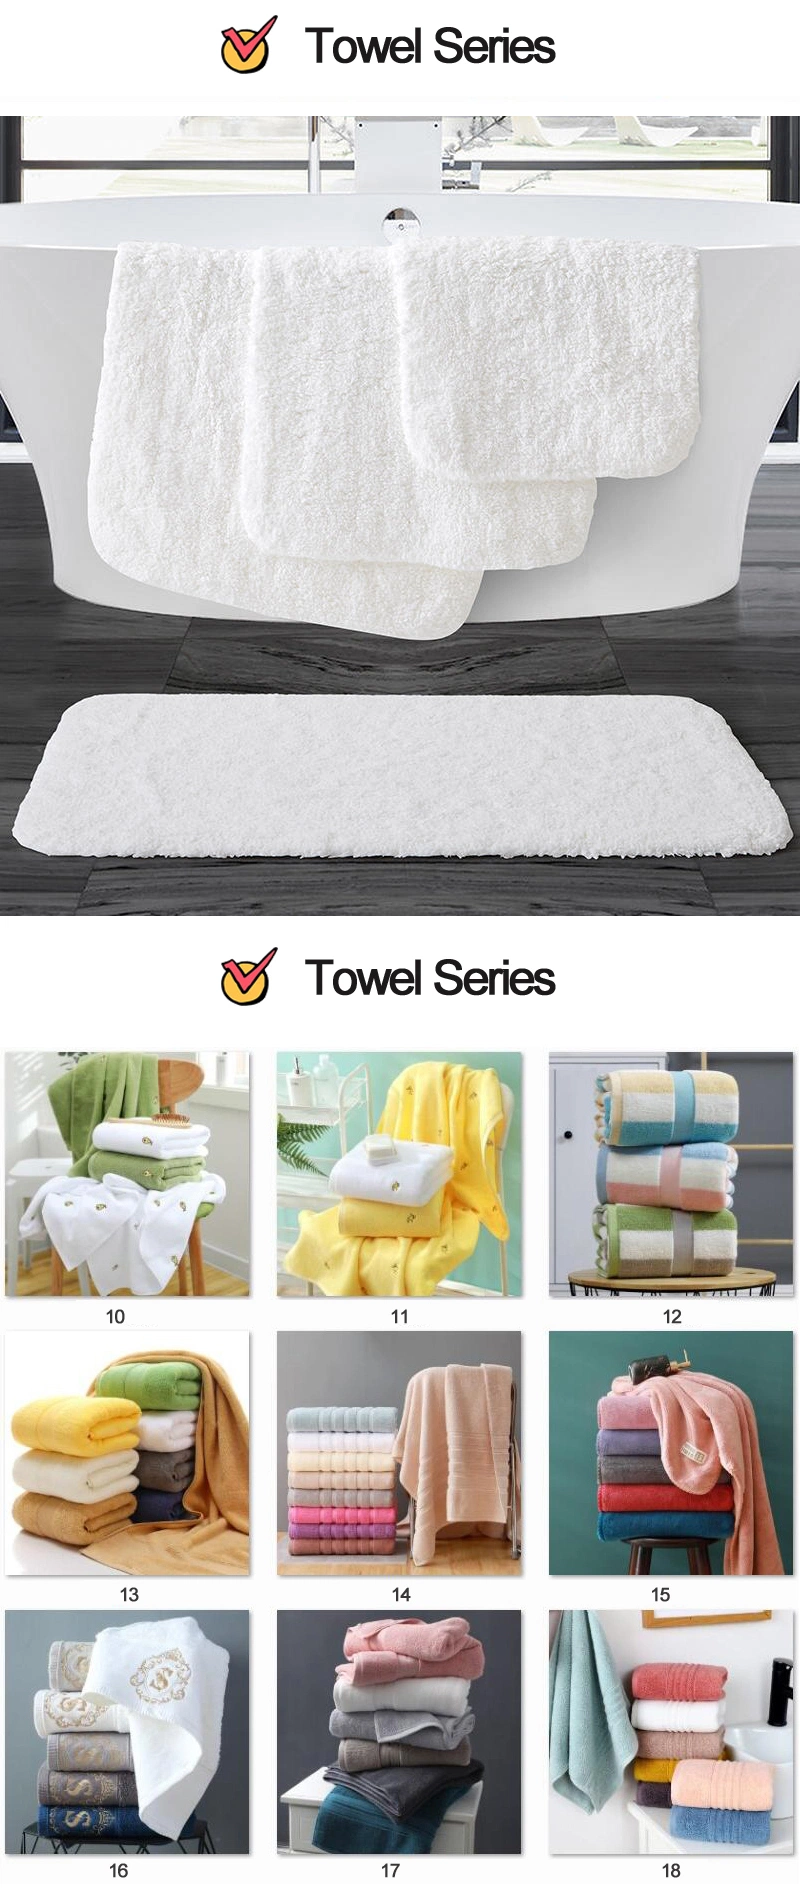 Luxury 6 Piece Hotel and SPA Towel Set Soft and Thick Bath Towels Made with 100% Turkish Cotton 2 Bathtowels 2 Handtowels 2 Was